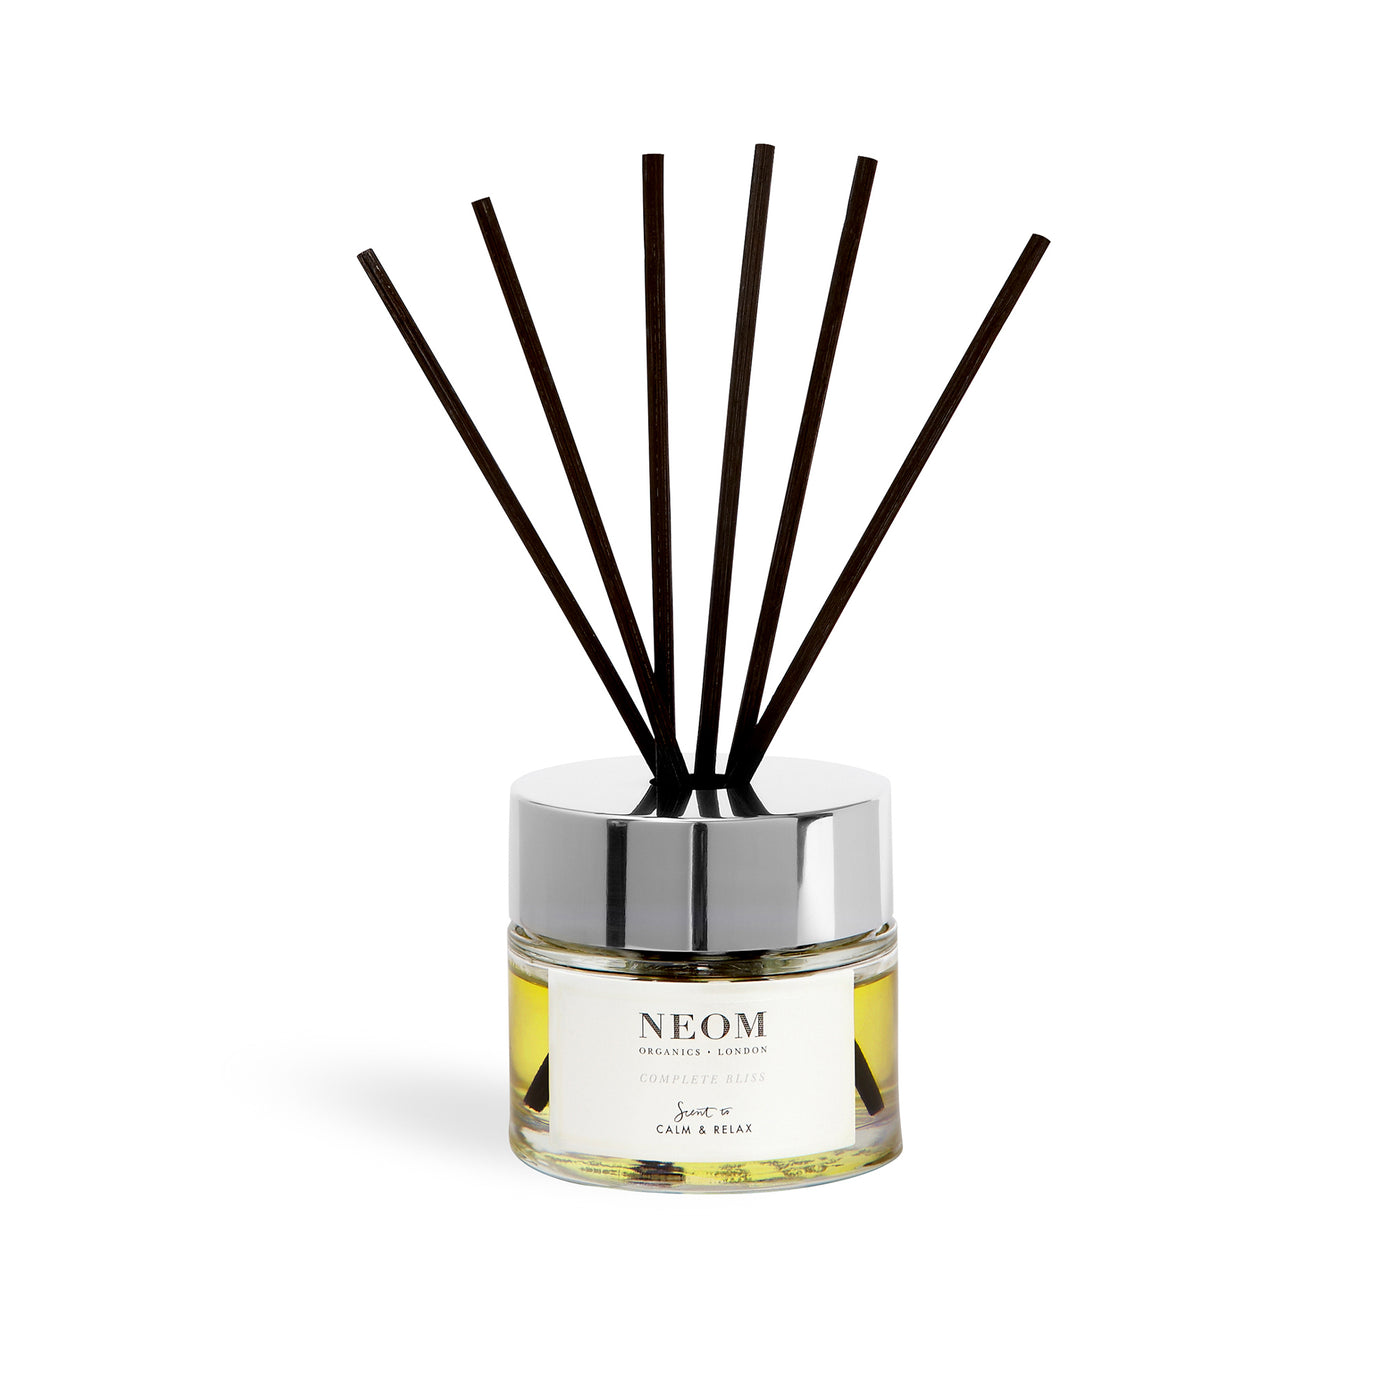 NEOM Organics - Complete Bliss Reed Diffuser